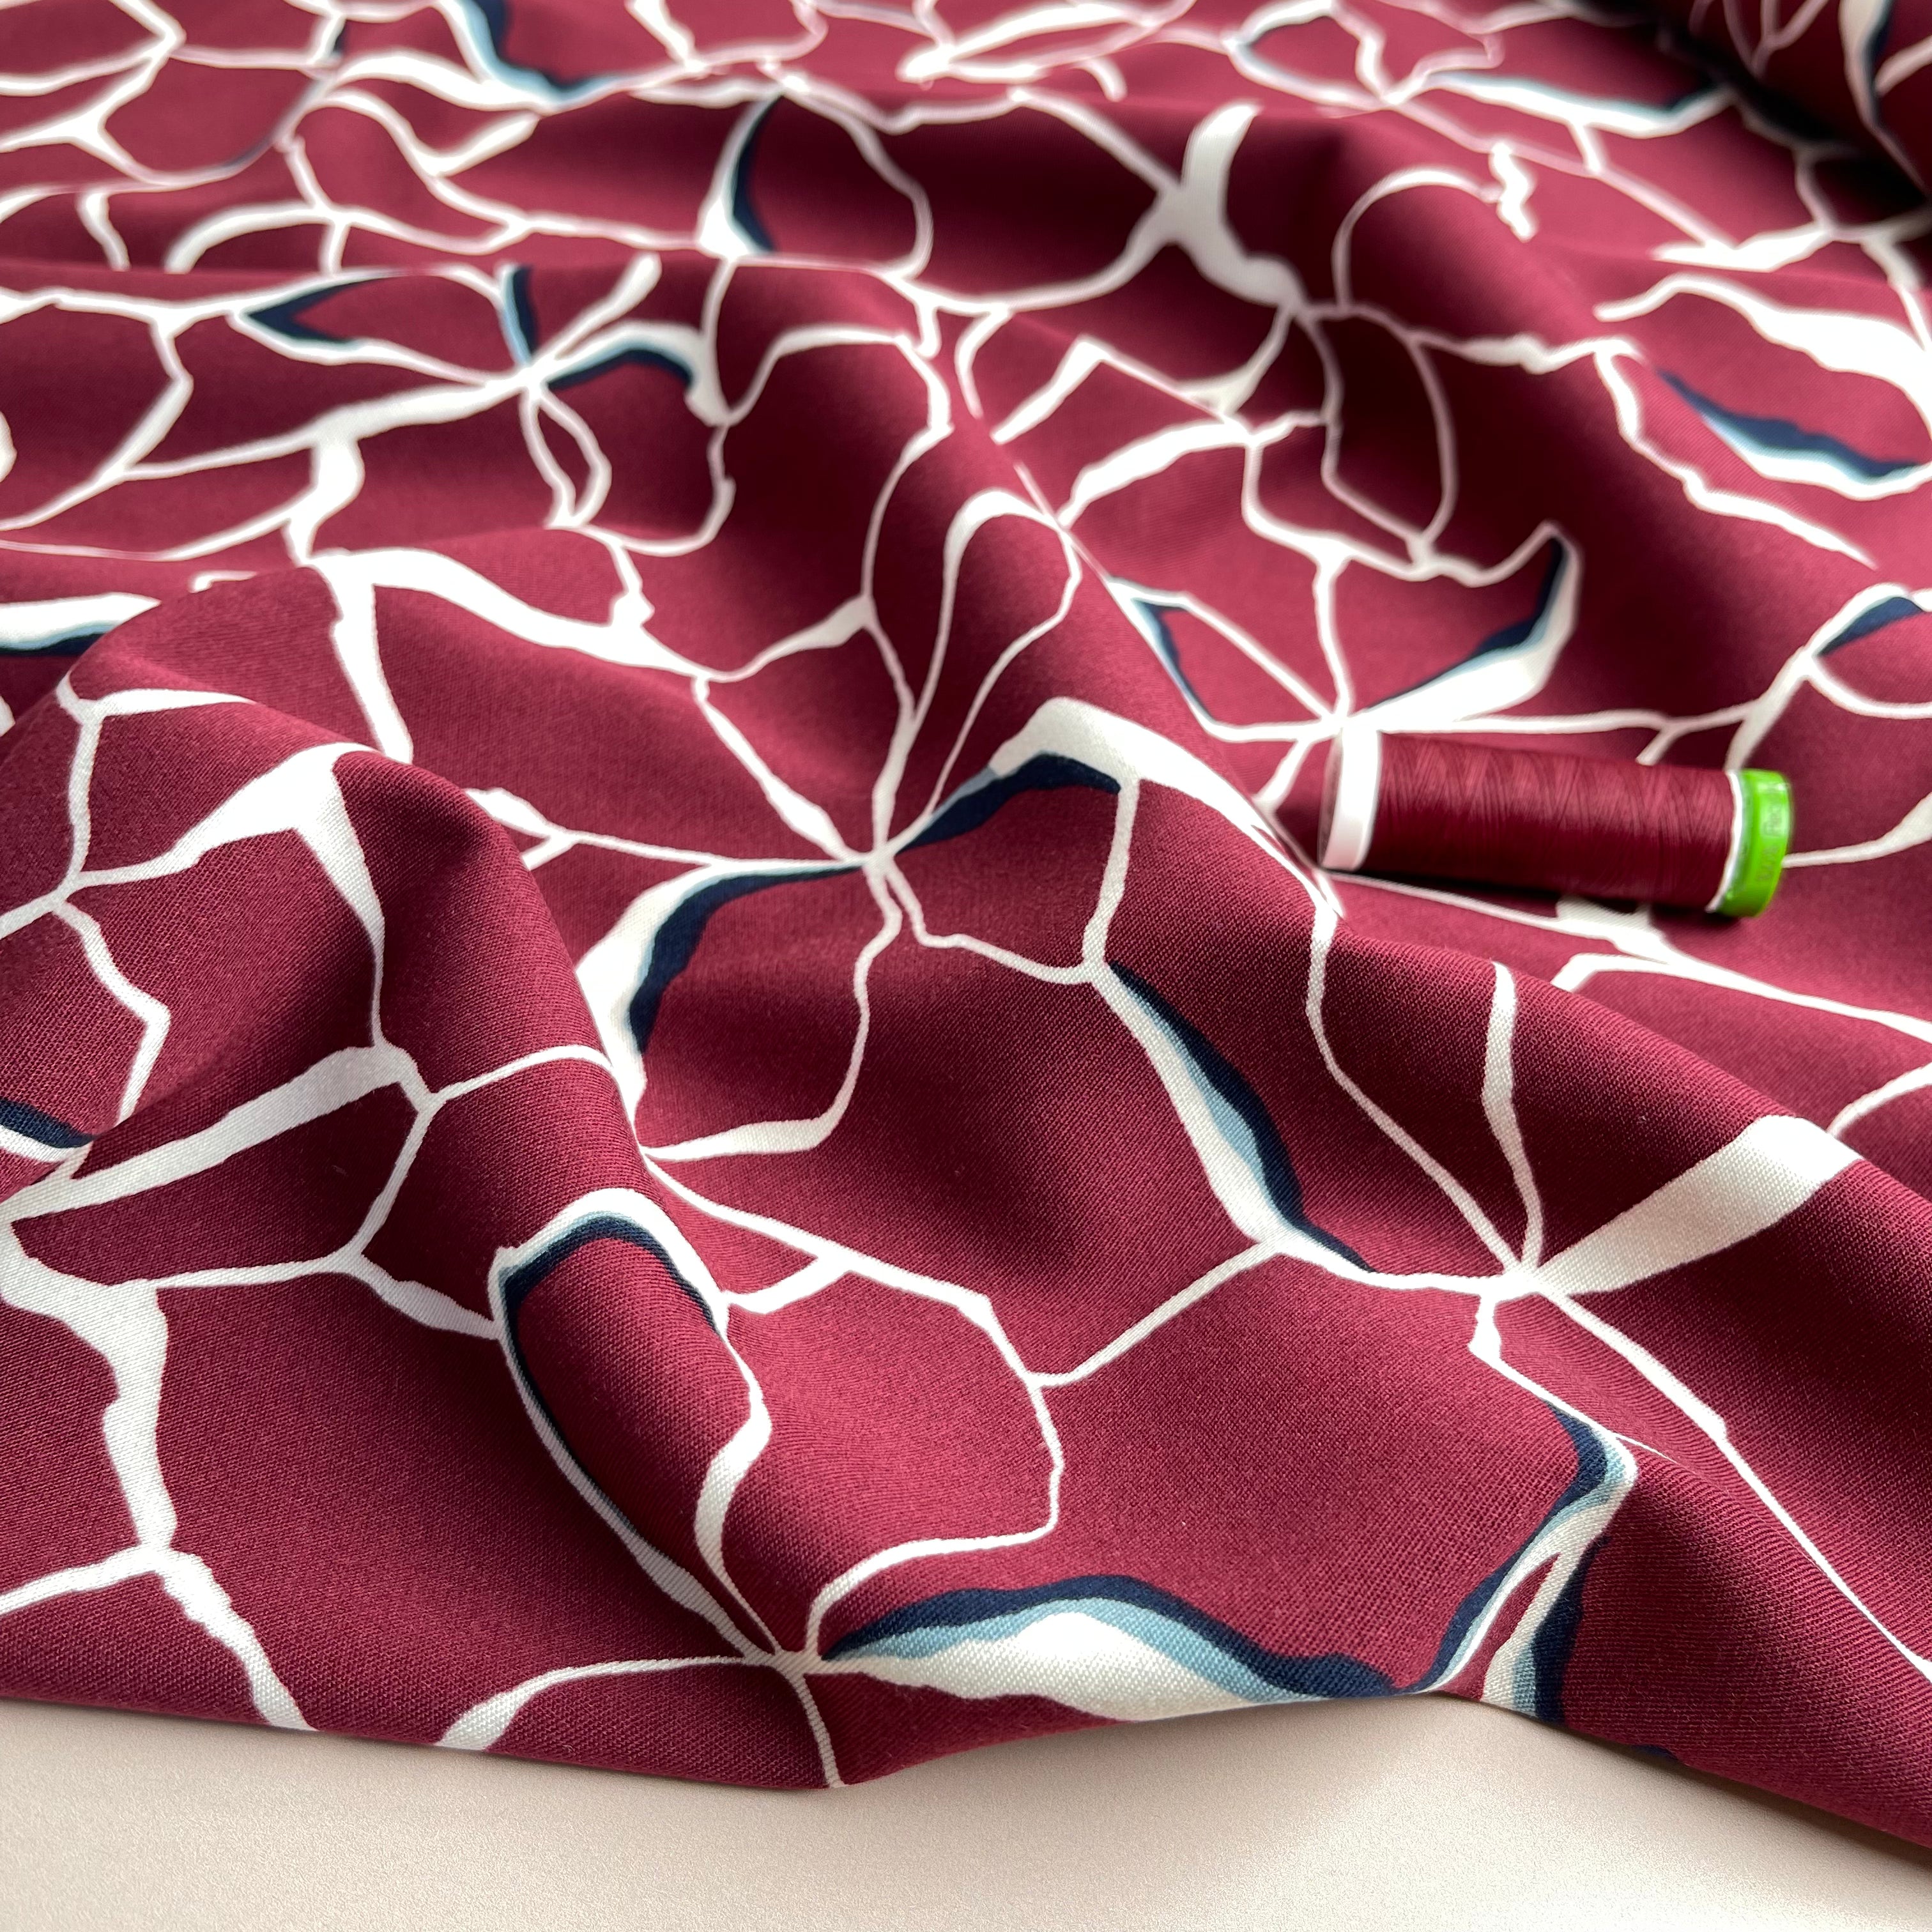 Rosella Line Flowers in Berry Stretch Viscose Twill Fabric